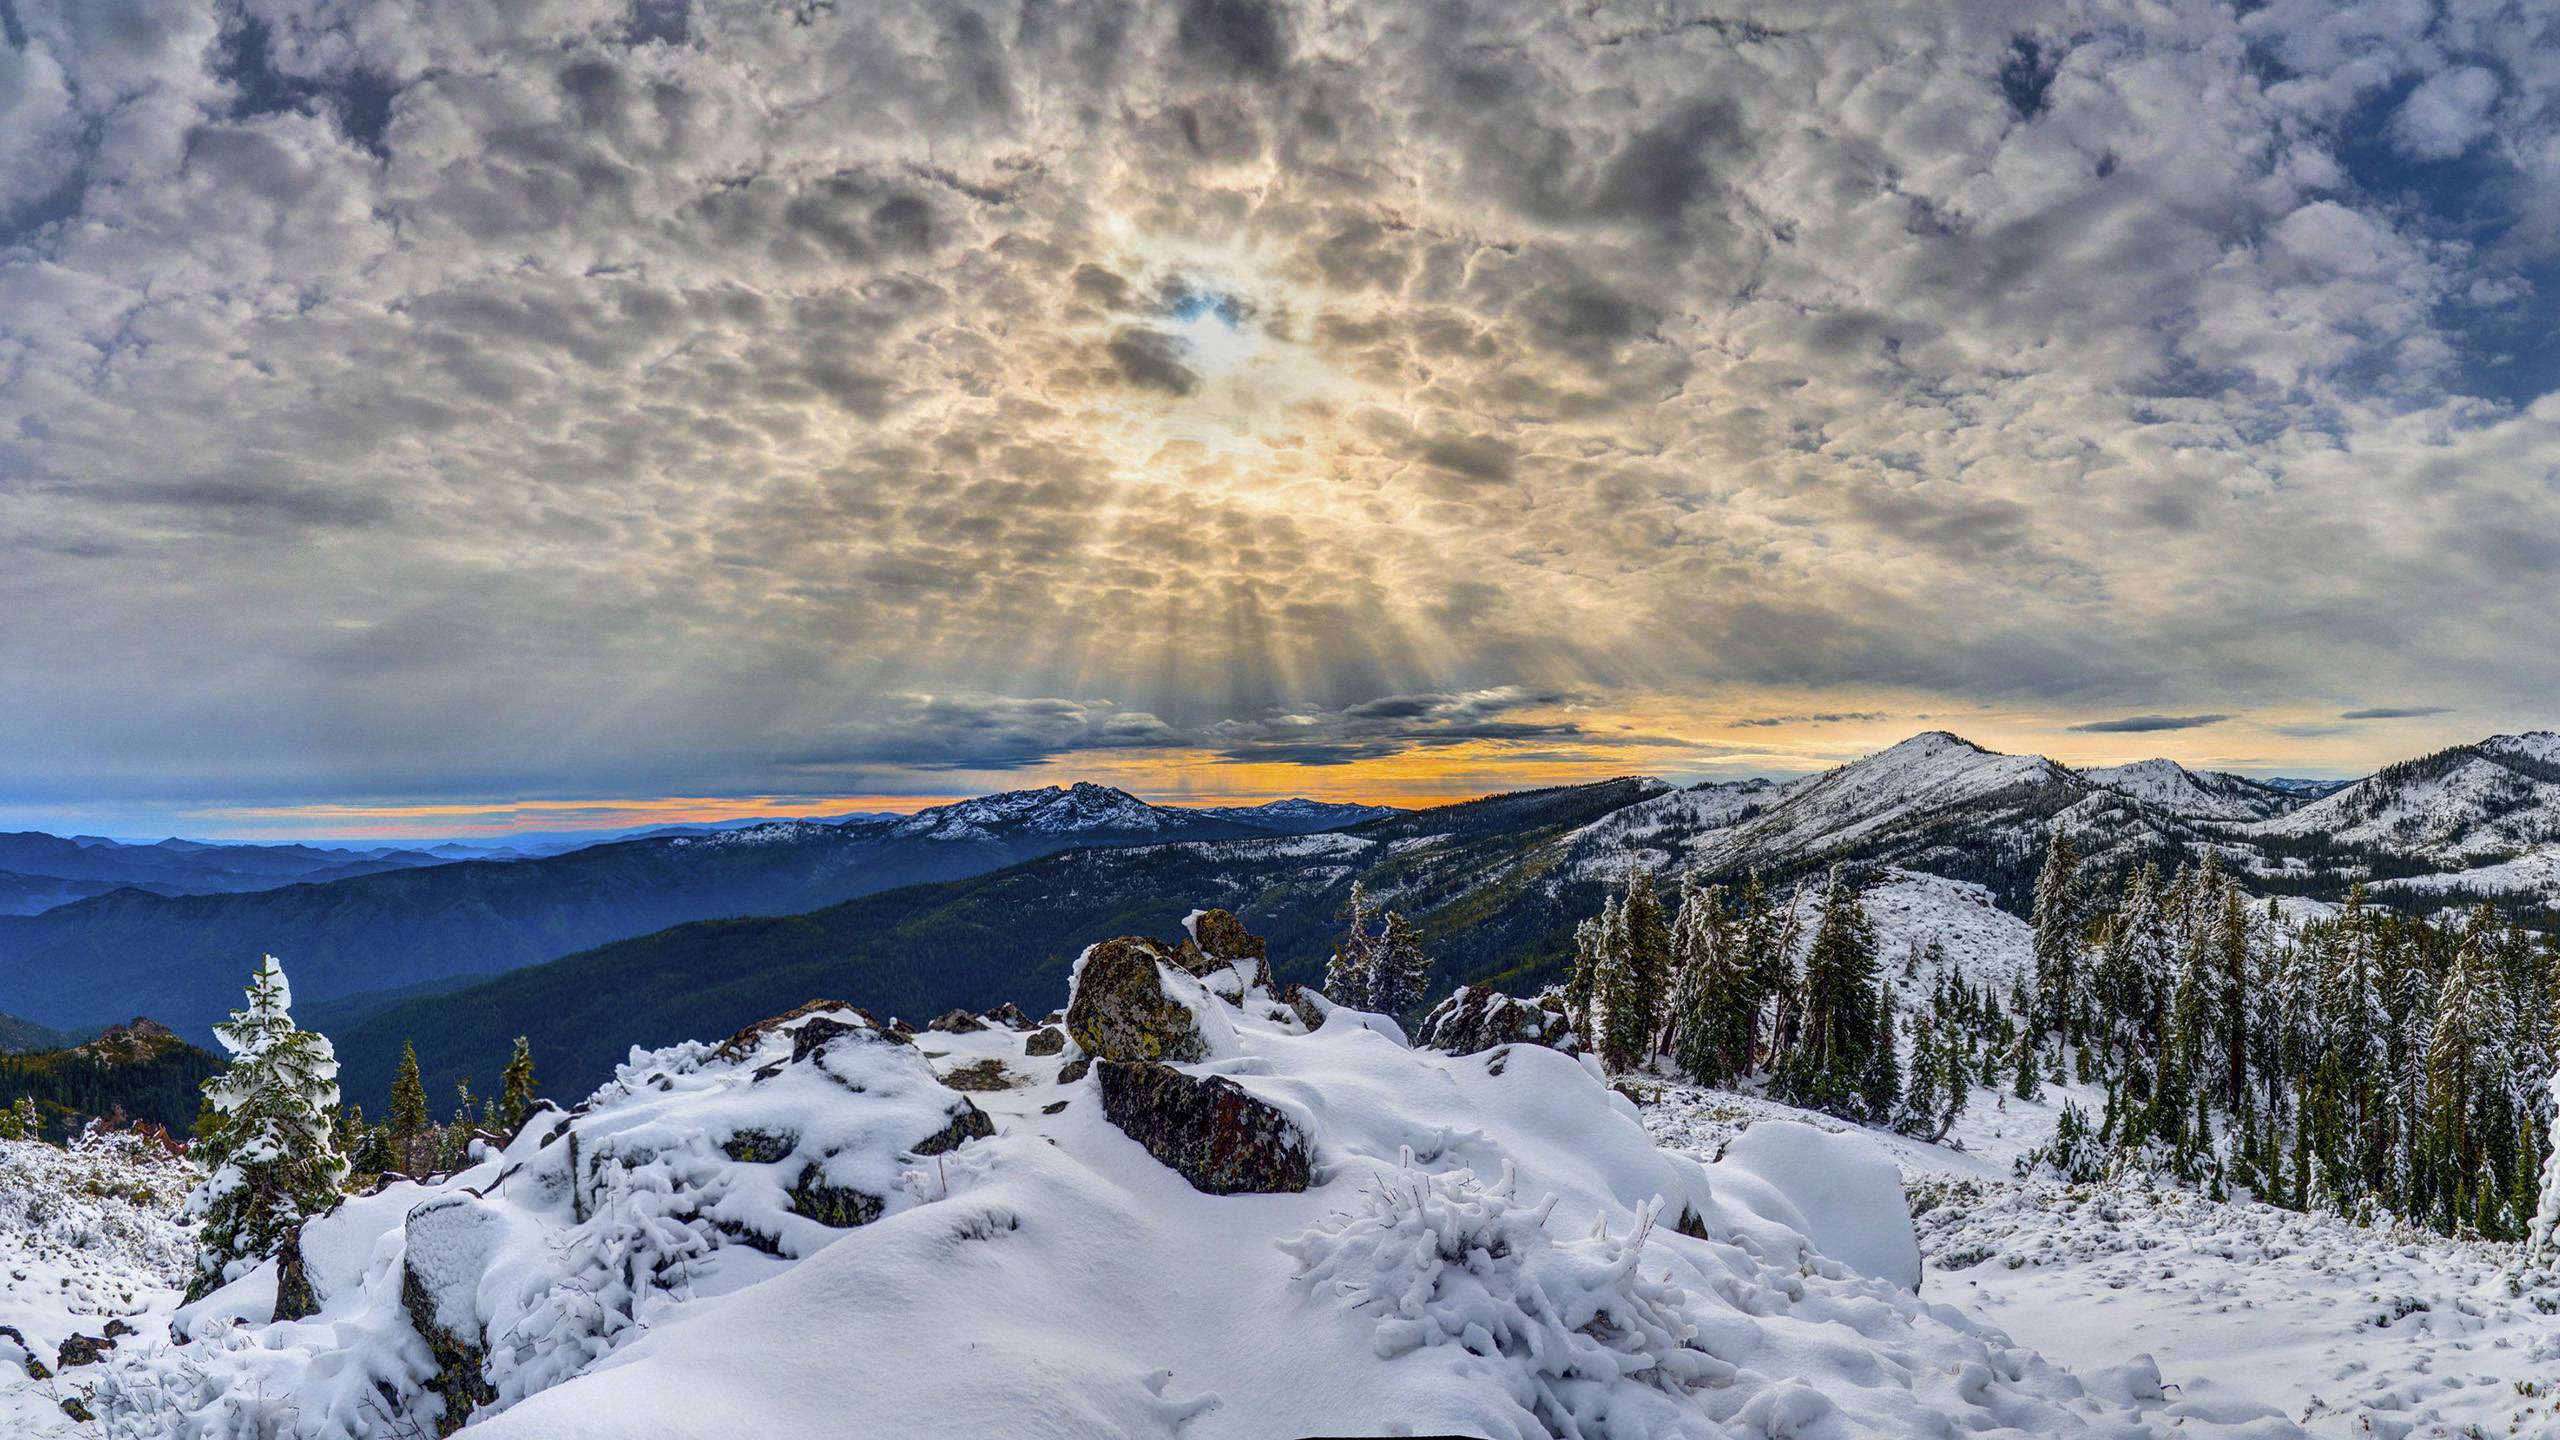 Corona And Crepuscular Rays Over The Klamath Mountains Of Northern